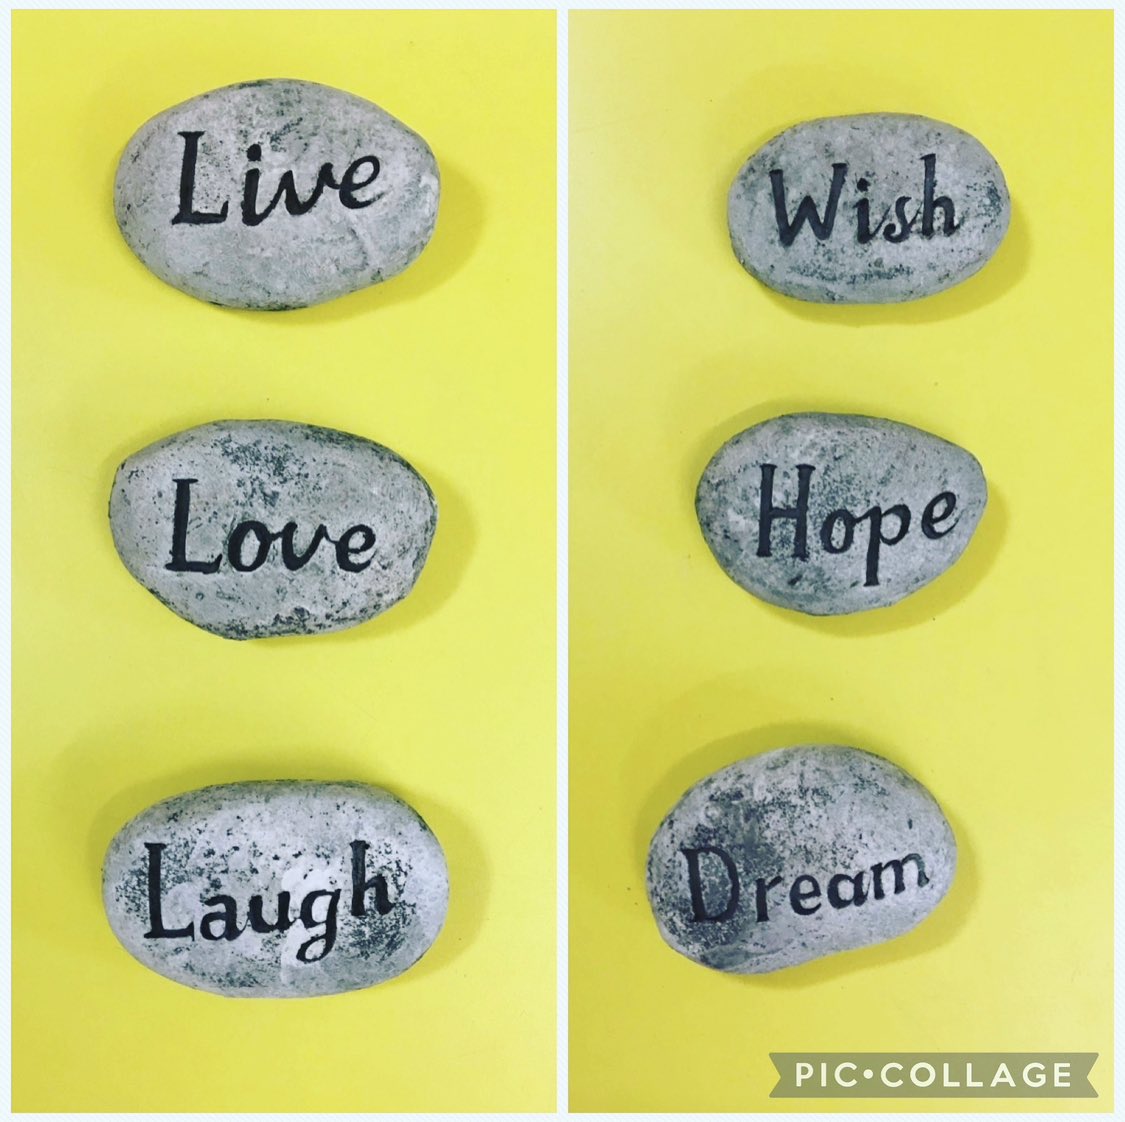 Toolkit Tuesday 💛
Today I want to share with you ‘Affirmation stones’
Affirmation stones are a simple & effective way to build positive thinking & confidence into a child's daily routine. 
#toolkittuesday #playtherapytoolkit #pru #primary #secondary #developmentaltrauma